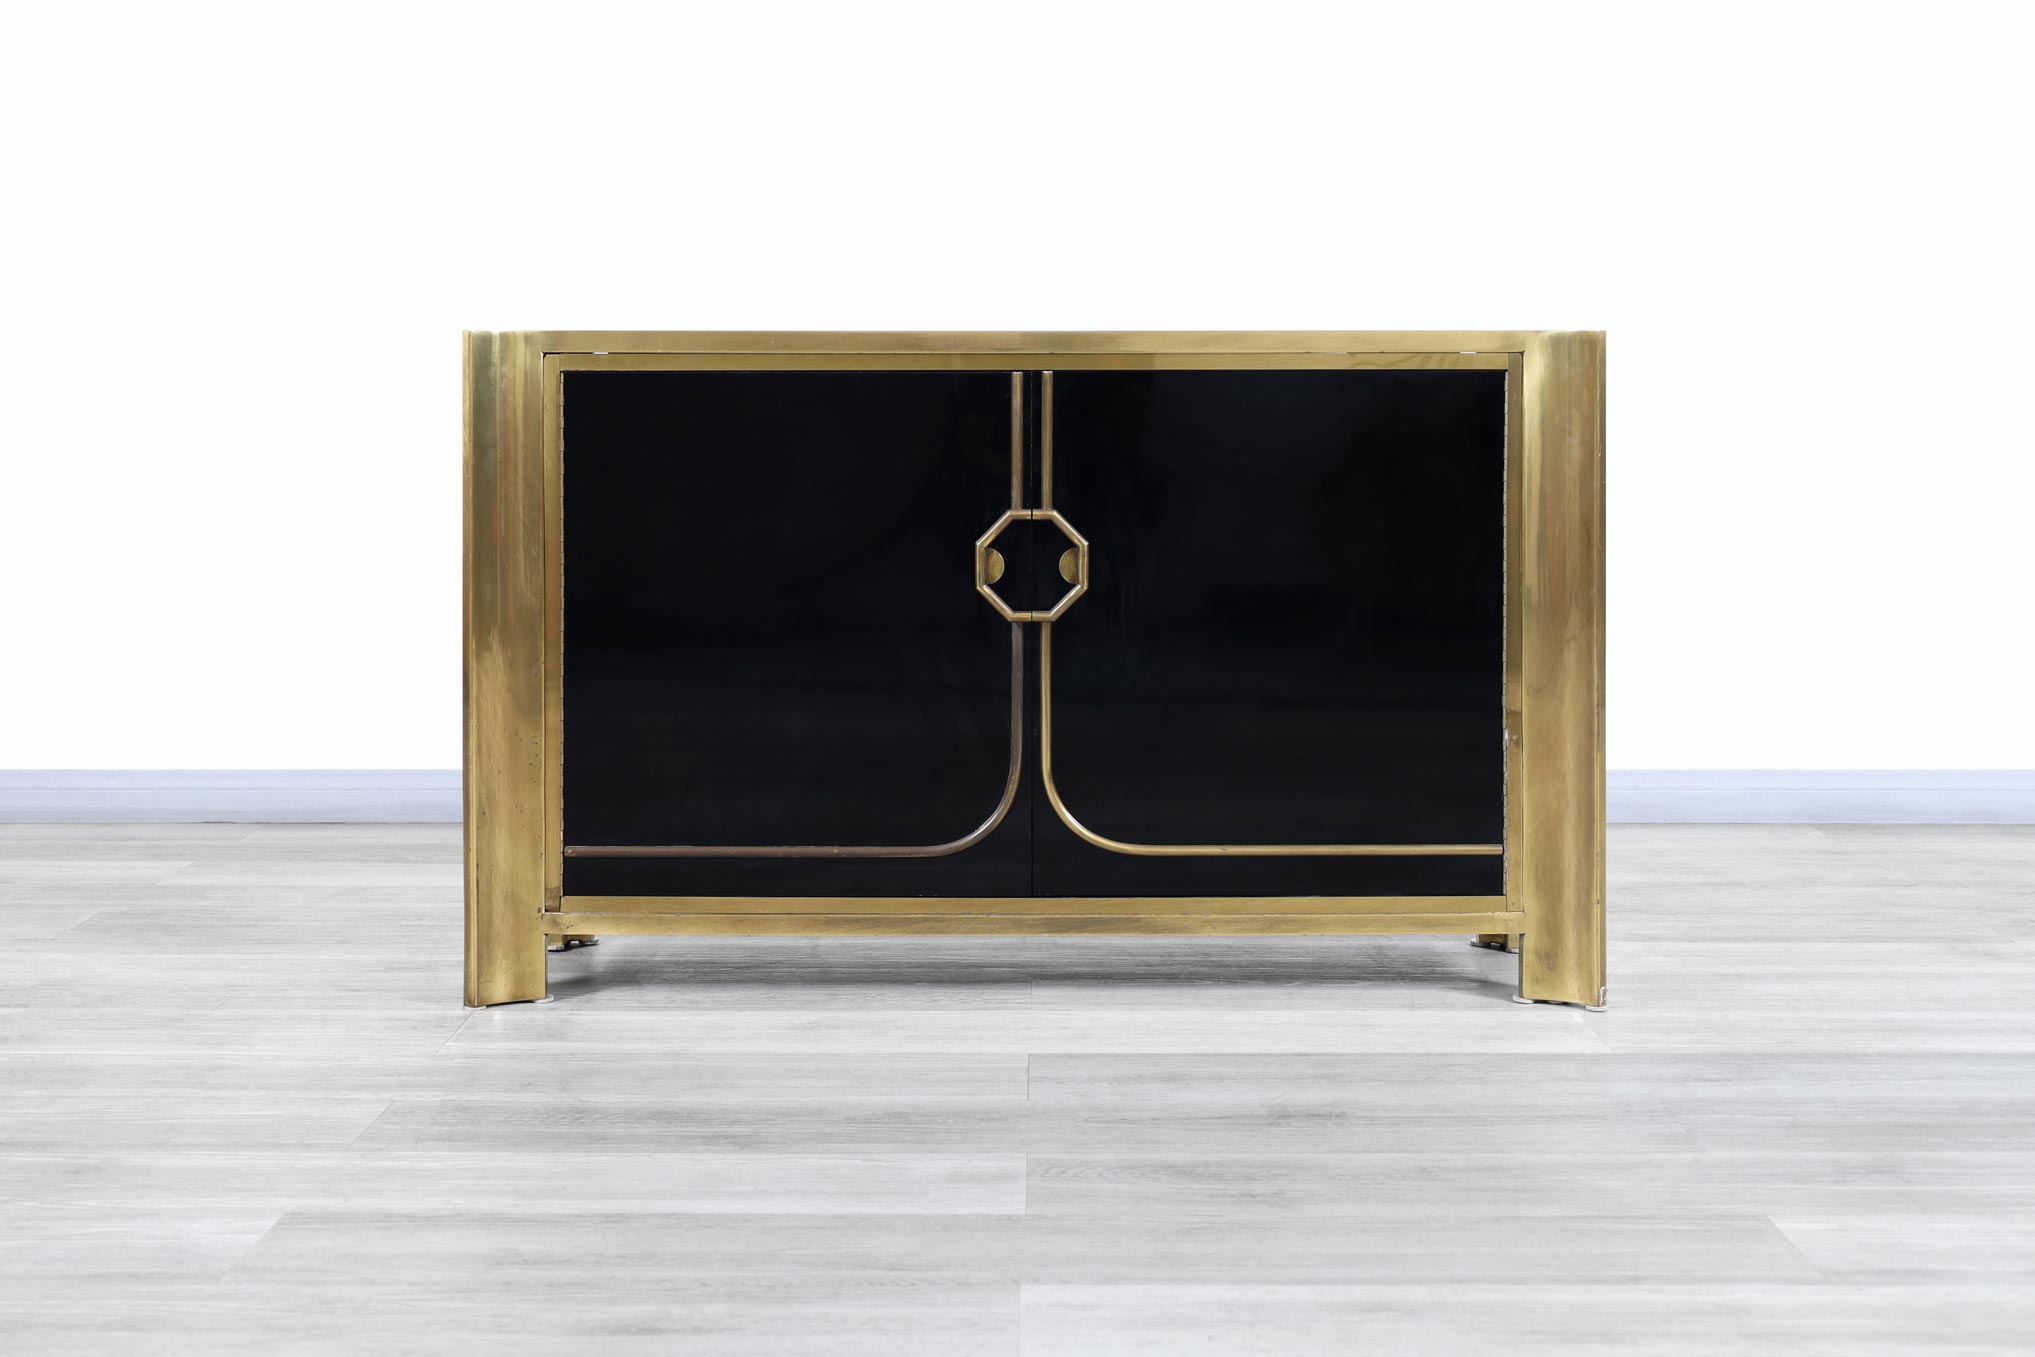 Vintage Patinated Brass and Lacquered Credenza by Mastercraft